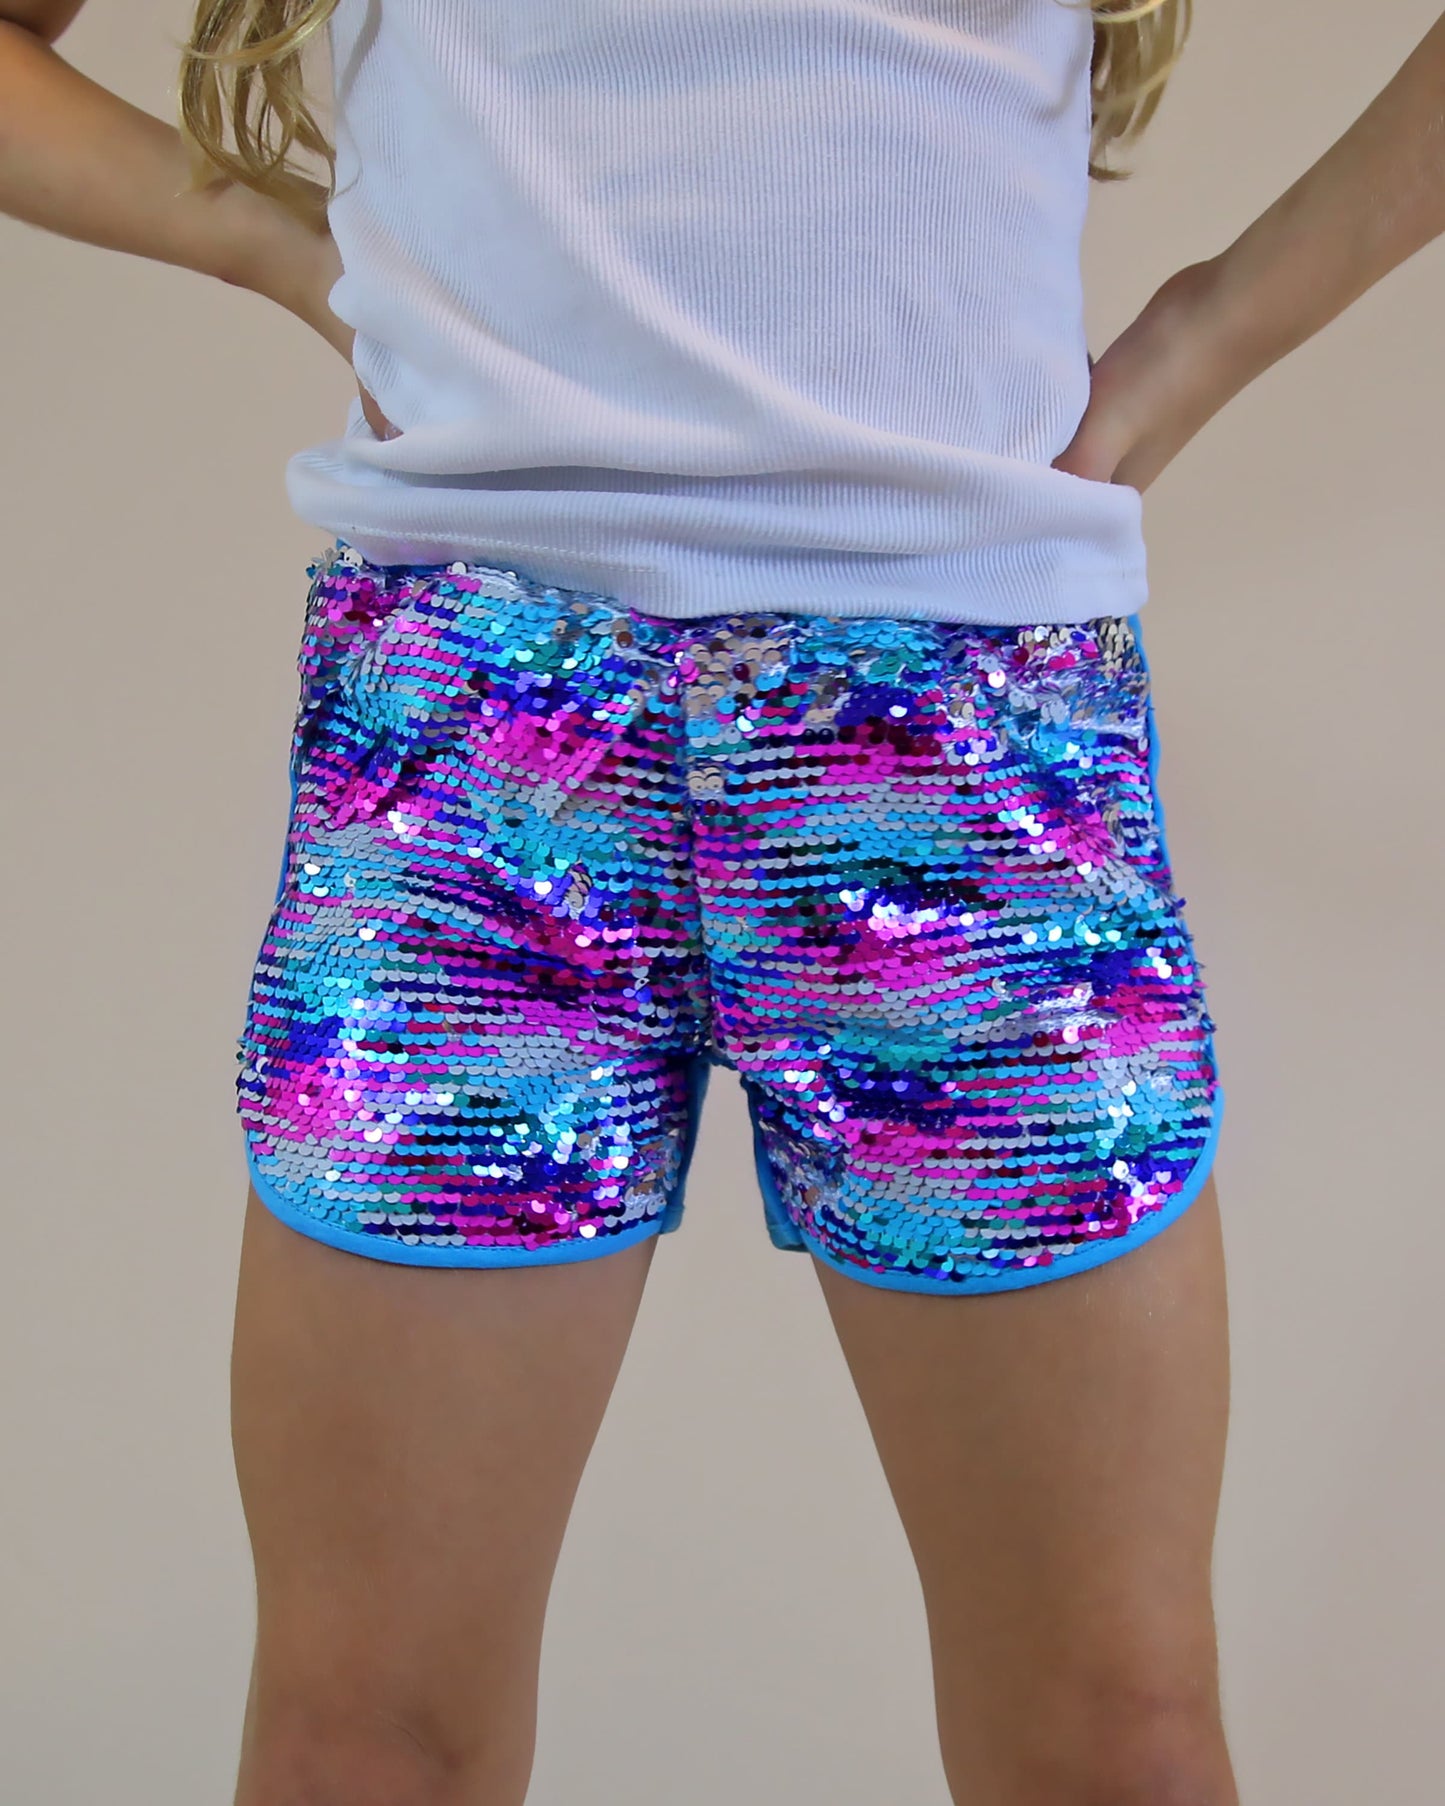 Flip Sequin Shorts in Turquoise and Hot Pink Mix